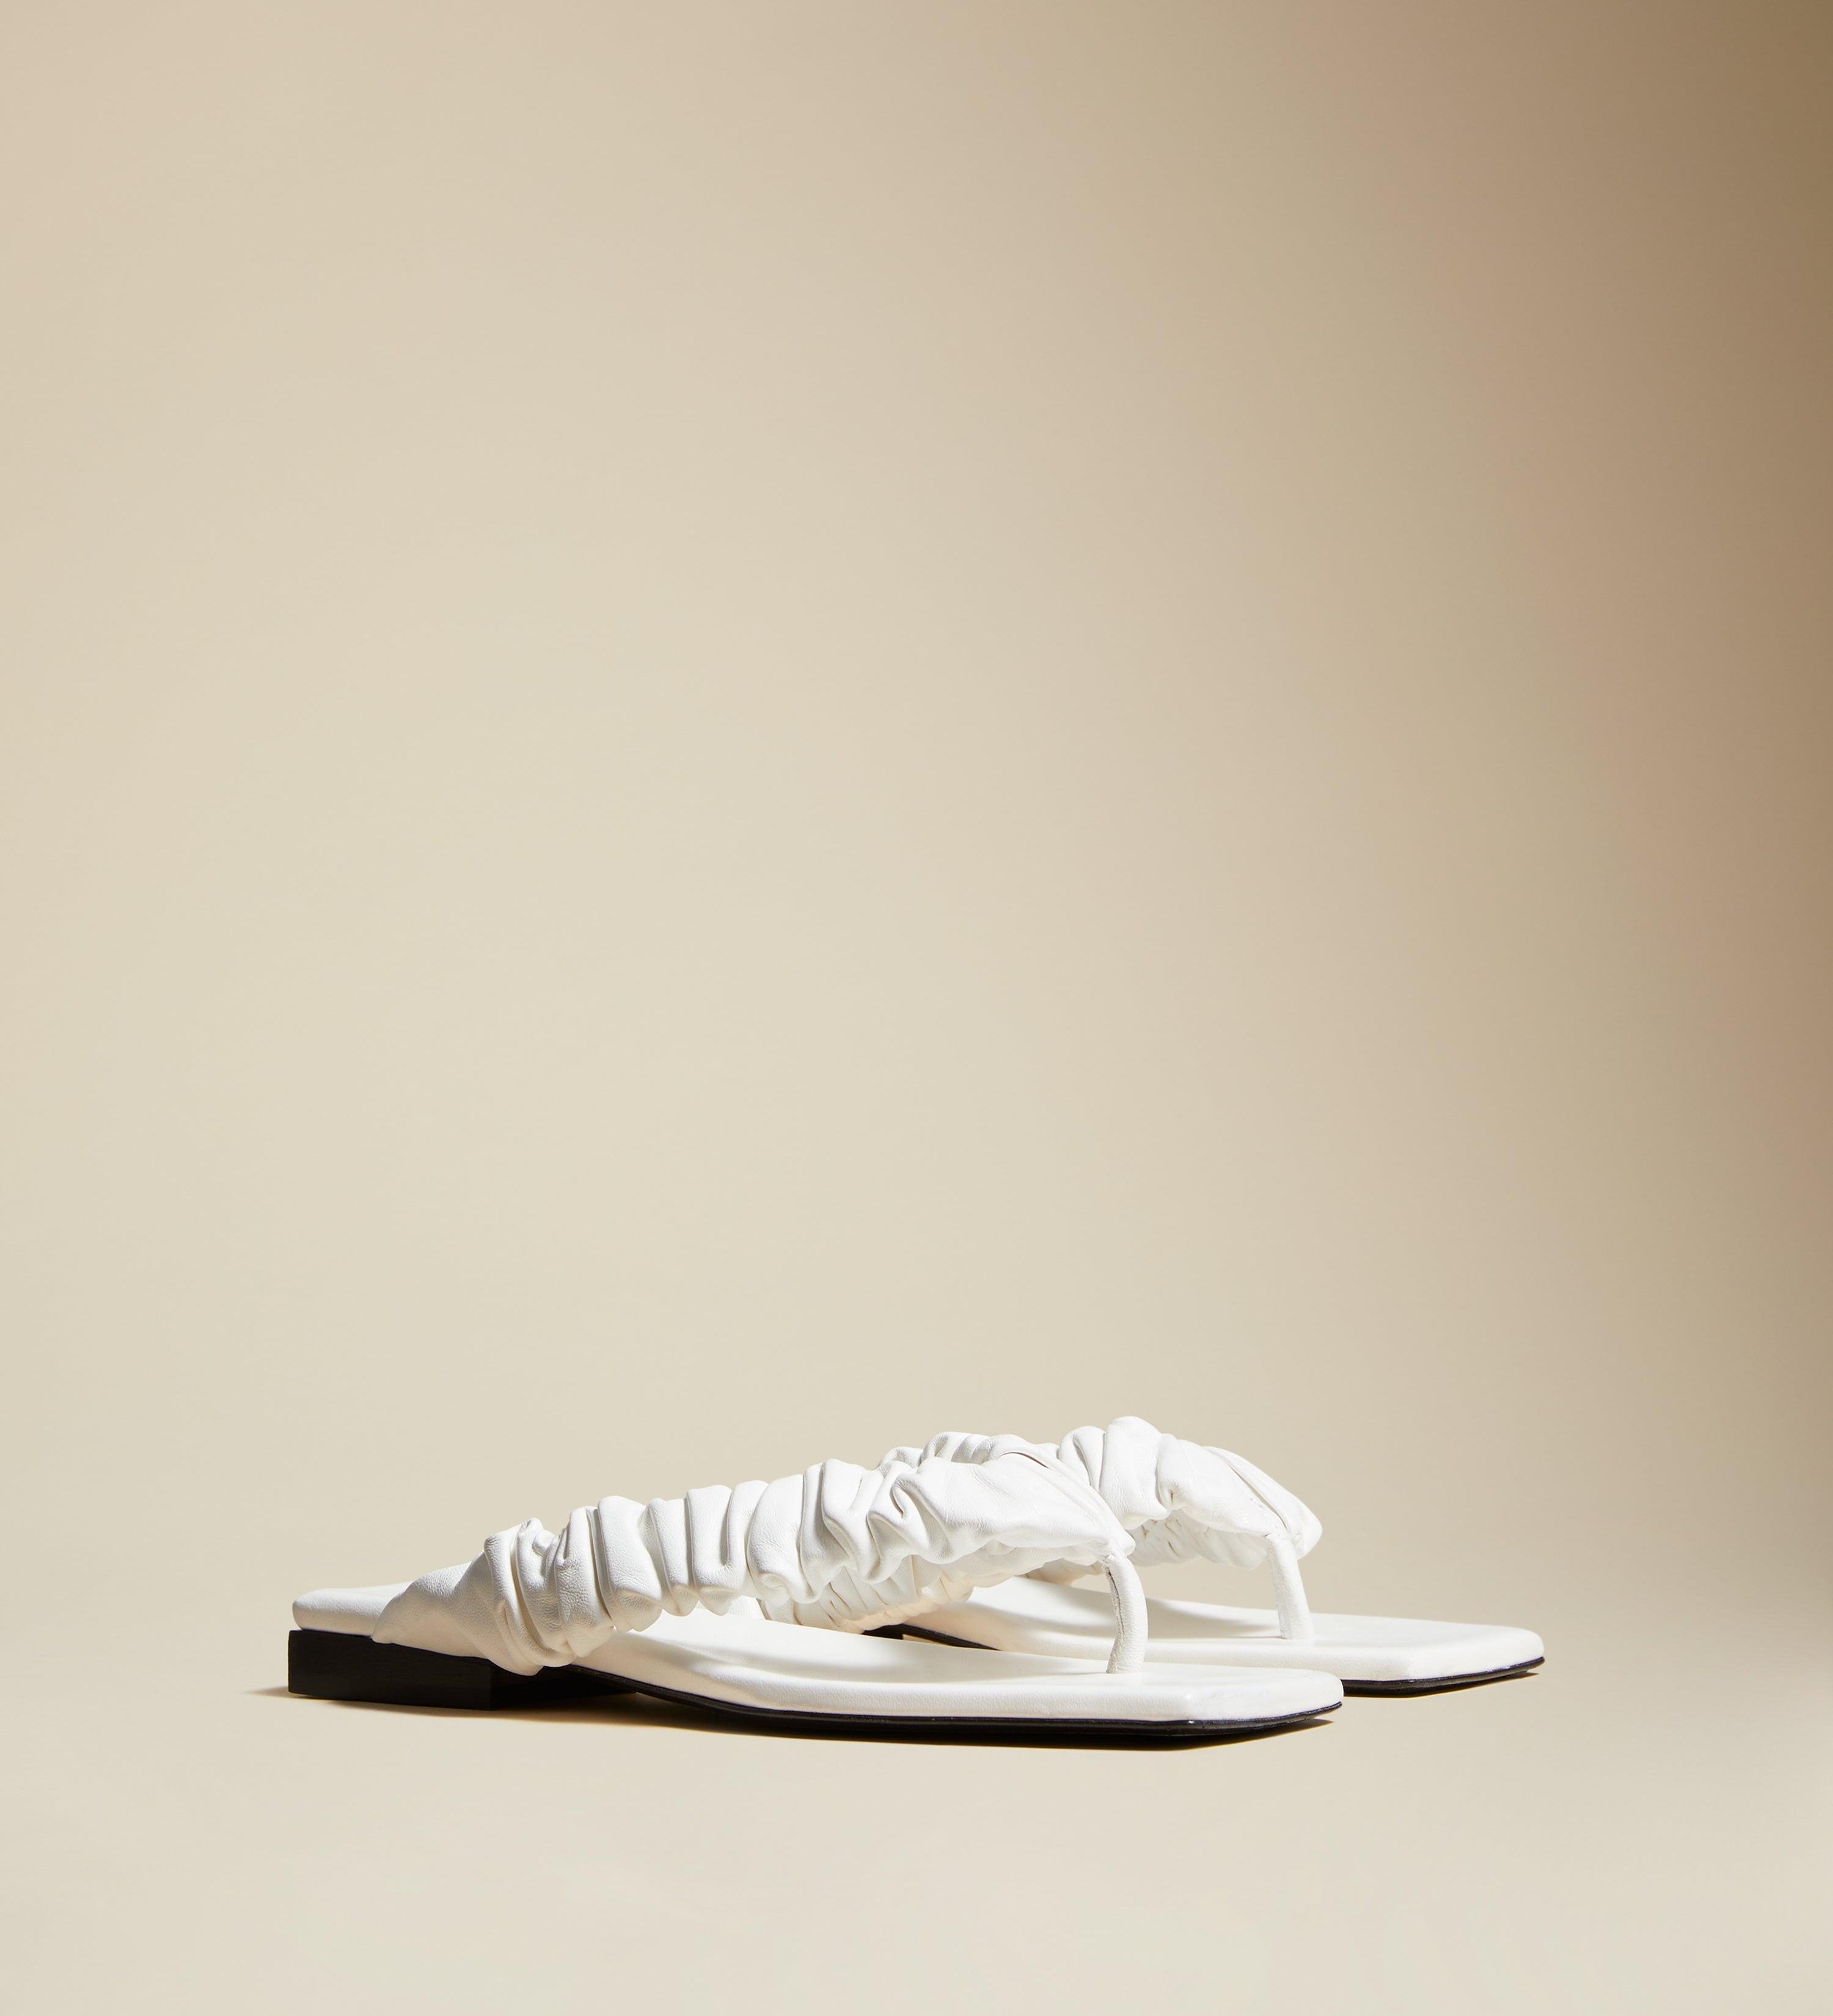 The Ash Sandal in Warm White Leather - The Iconic Issue